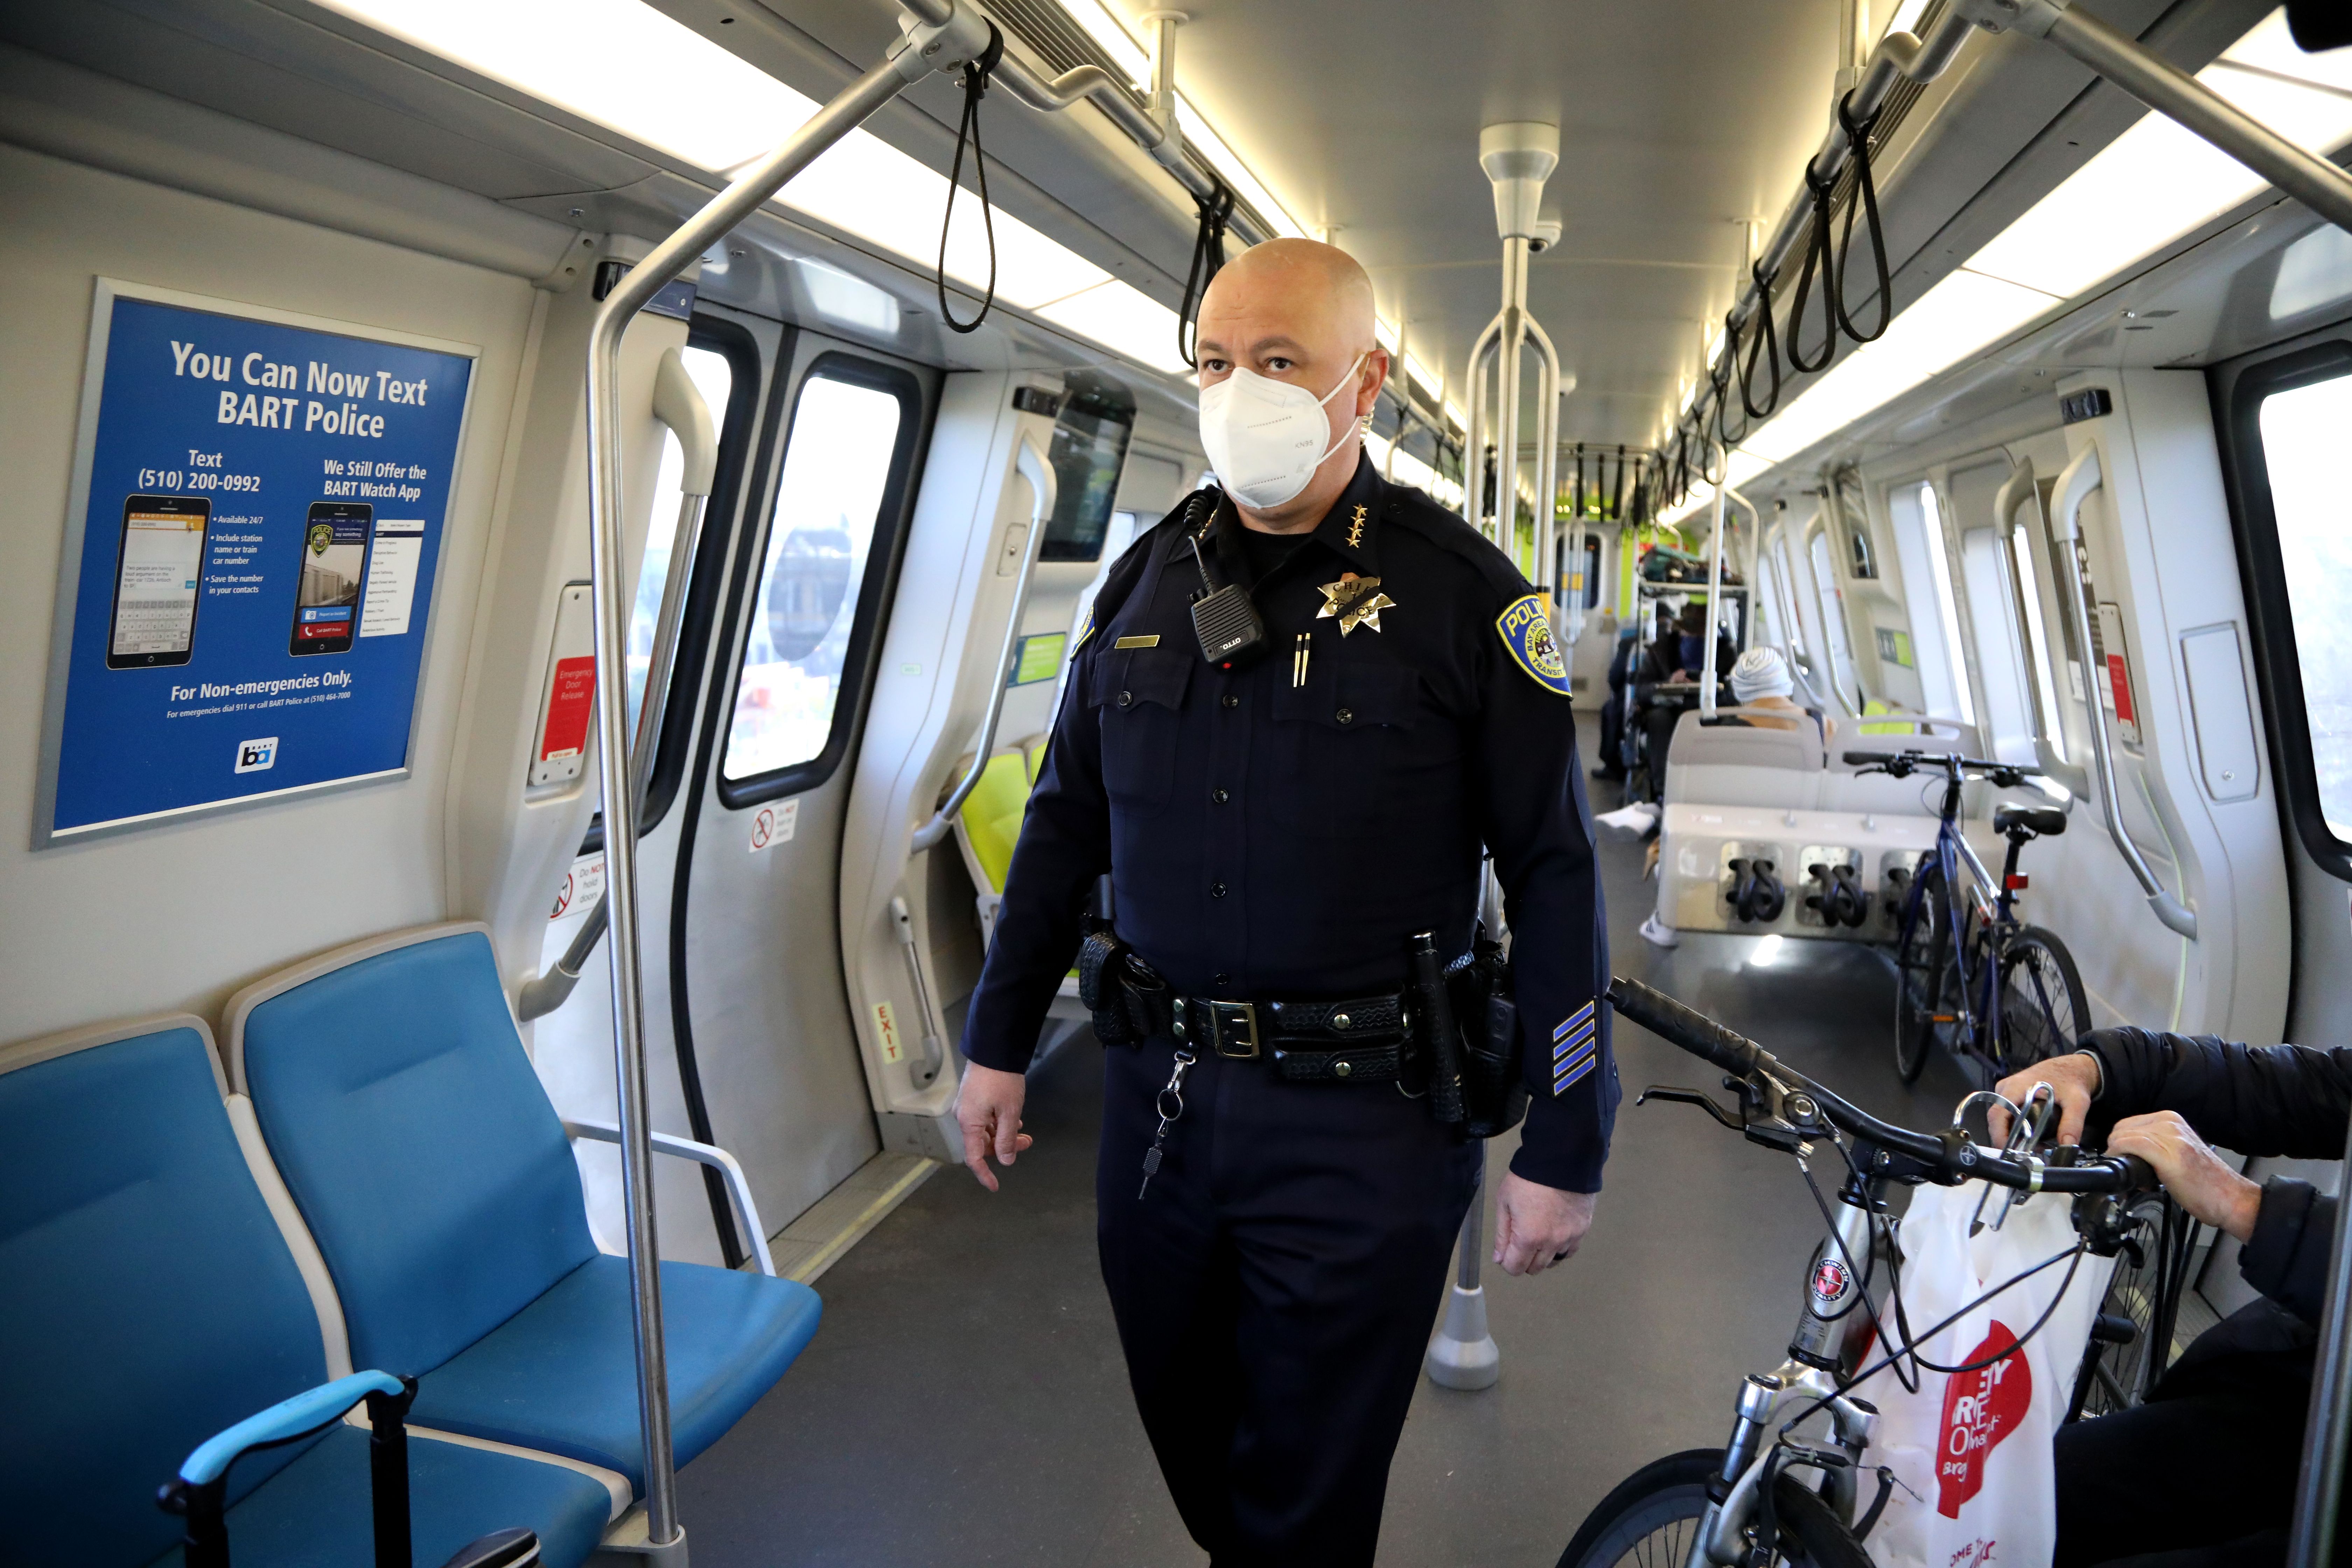 Chief Alvarez regularly walks trains to interact with passengers. Shown here on Feb. 1,  2021; note the poster at left behind bl